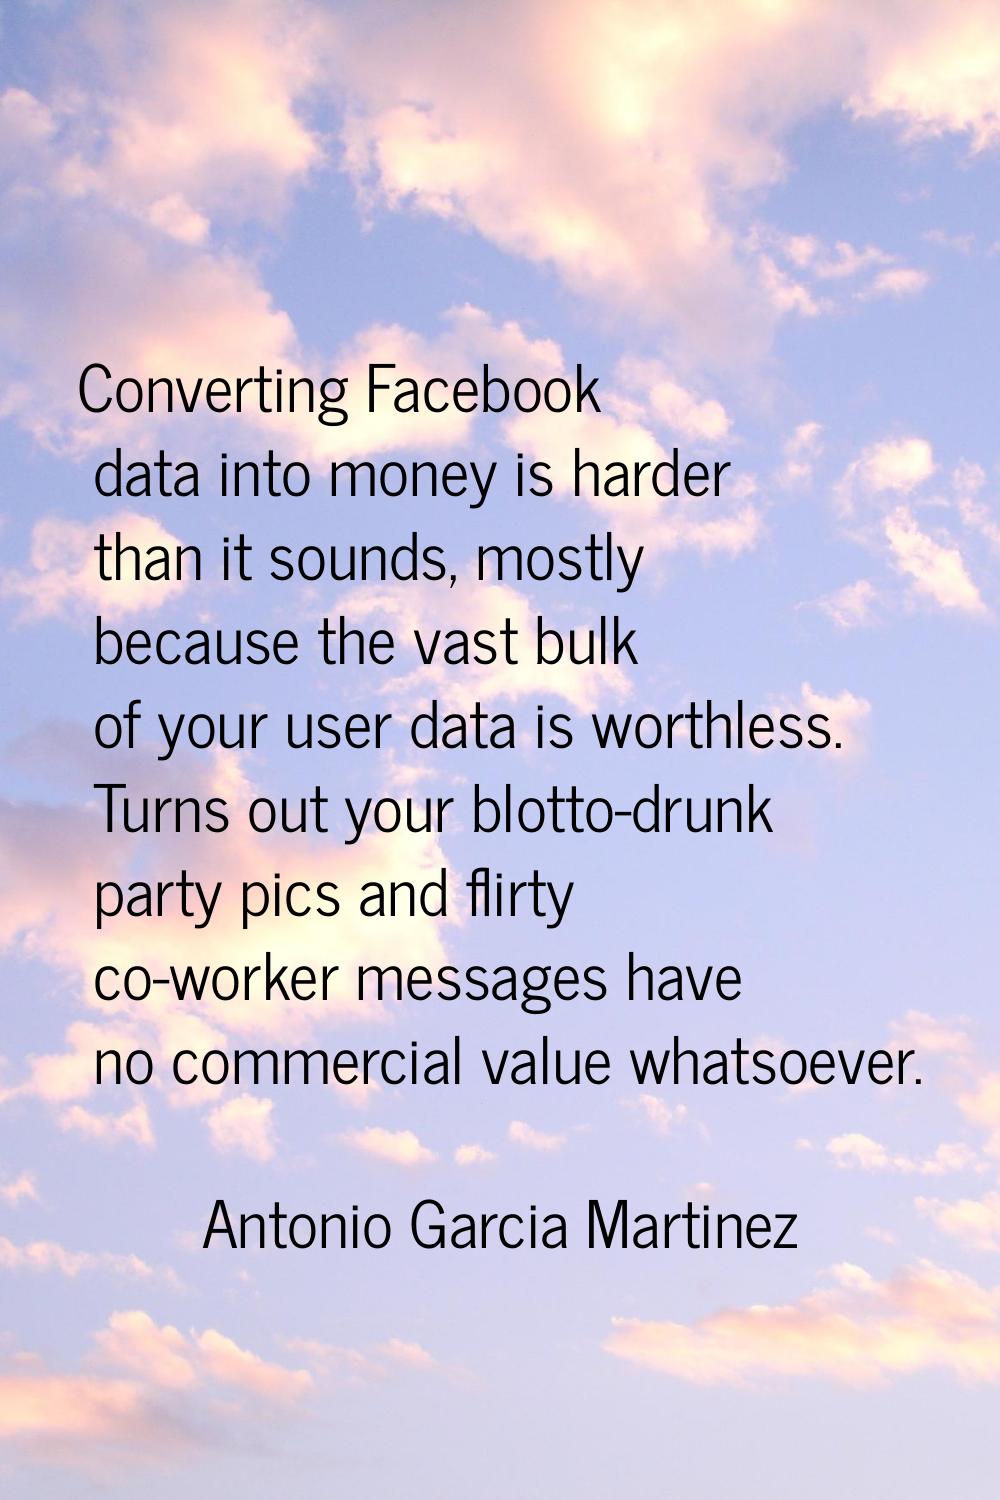 Converting Facebook data into money is harder than it sounds, mostly because the vast bulk of your 